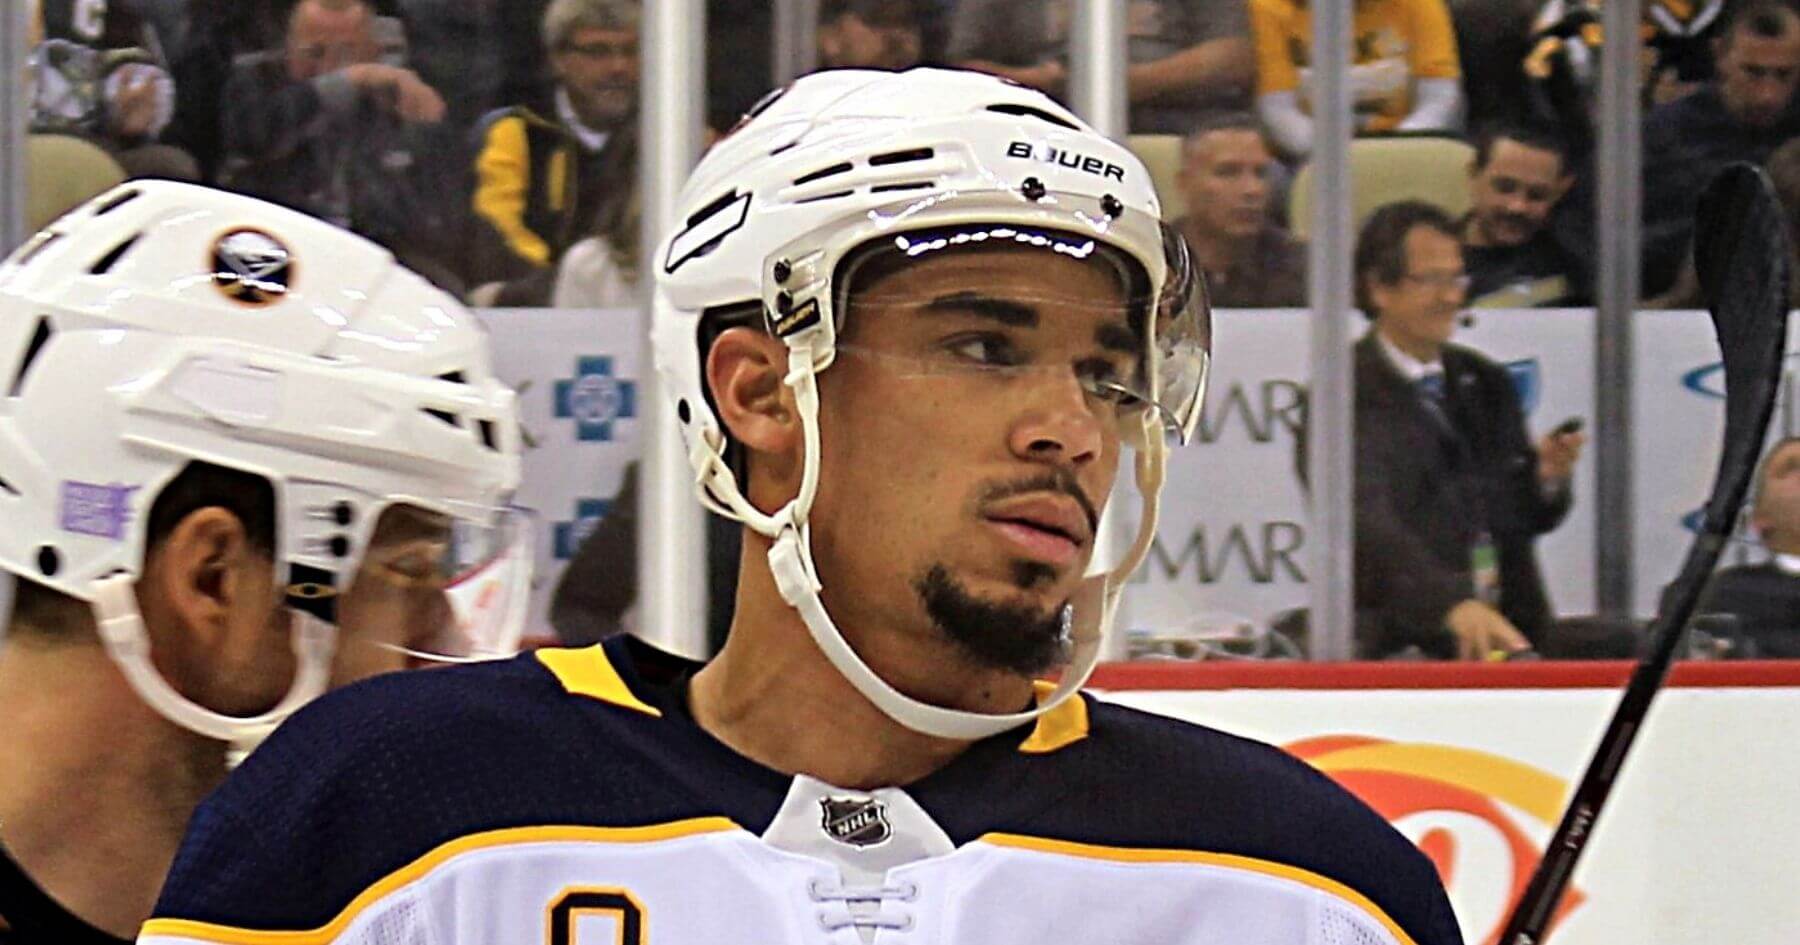 Ice hockey player promised $3 million to abort his own child